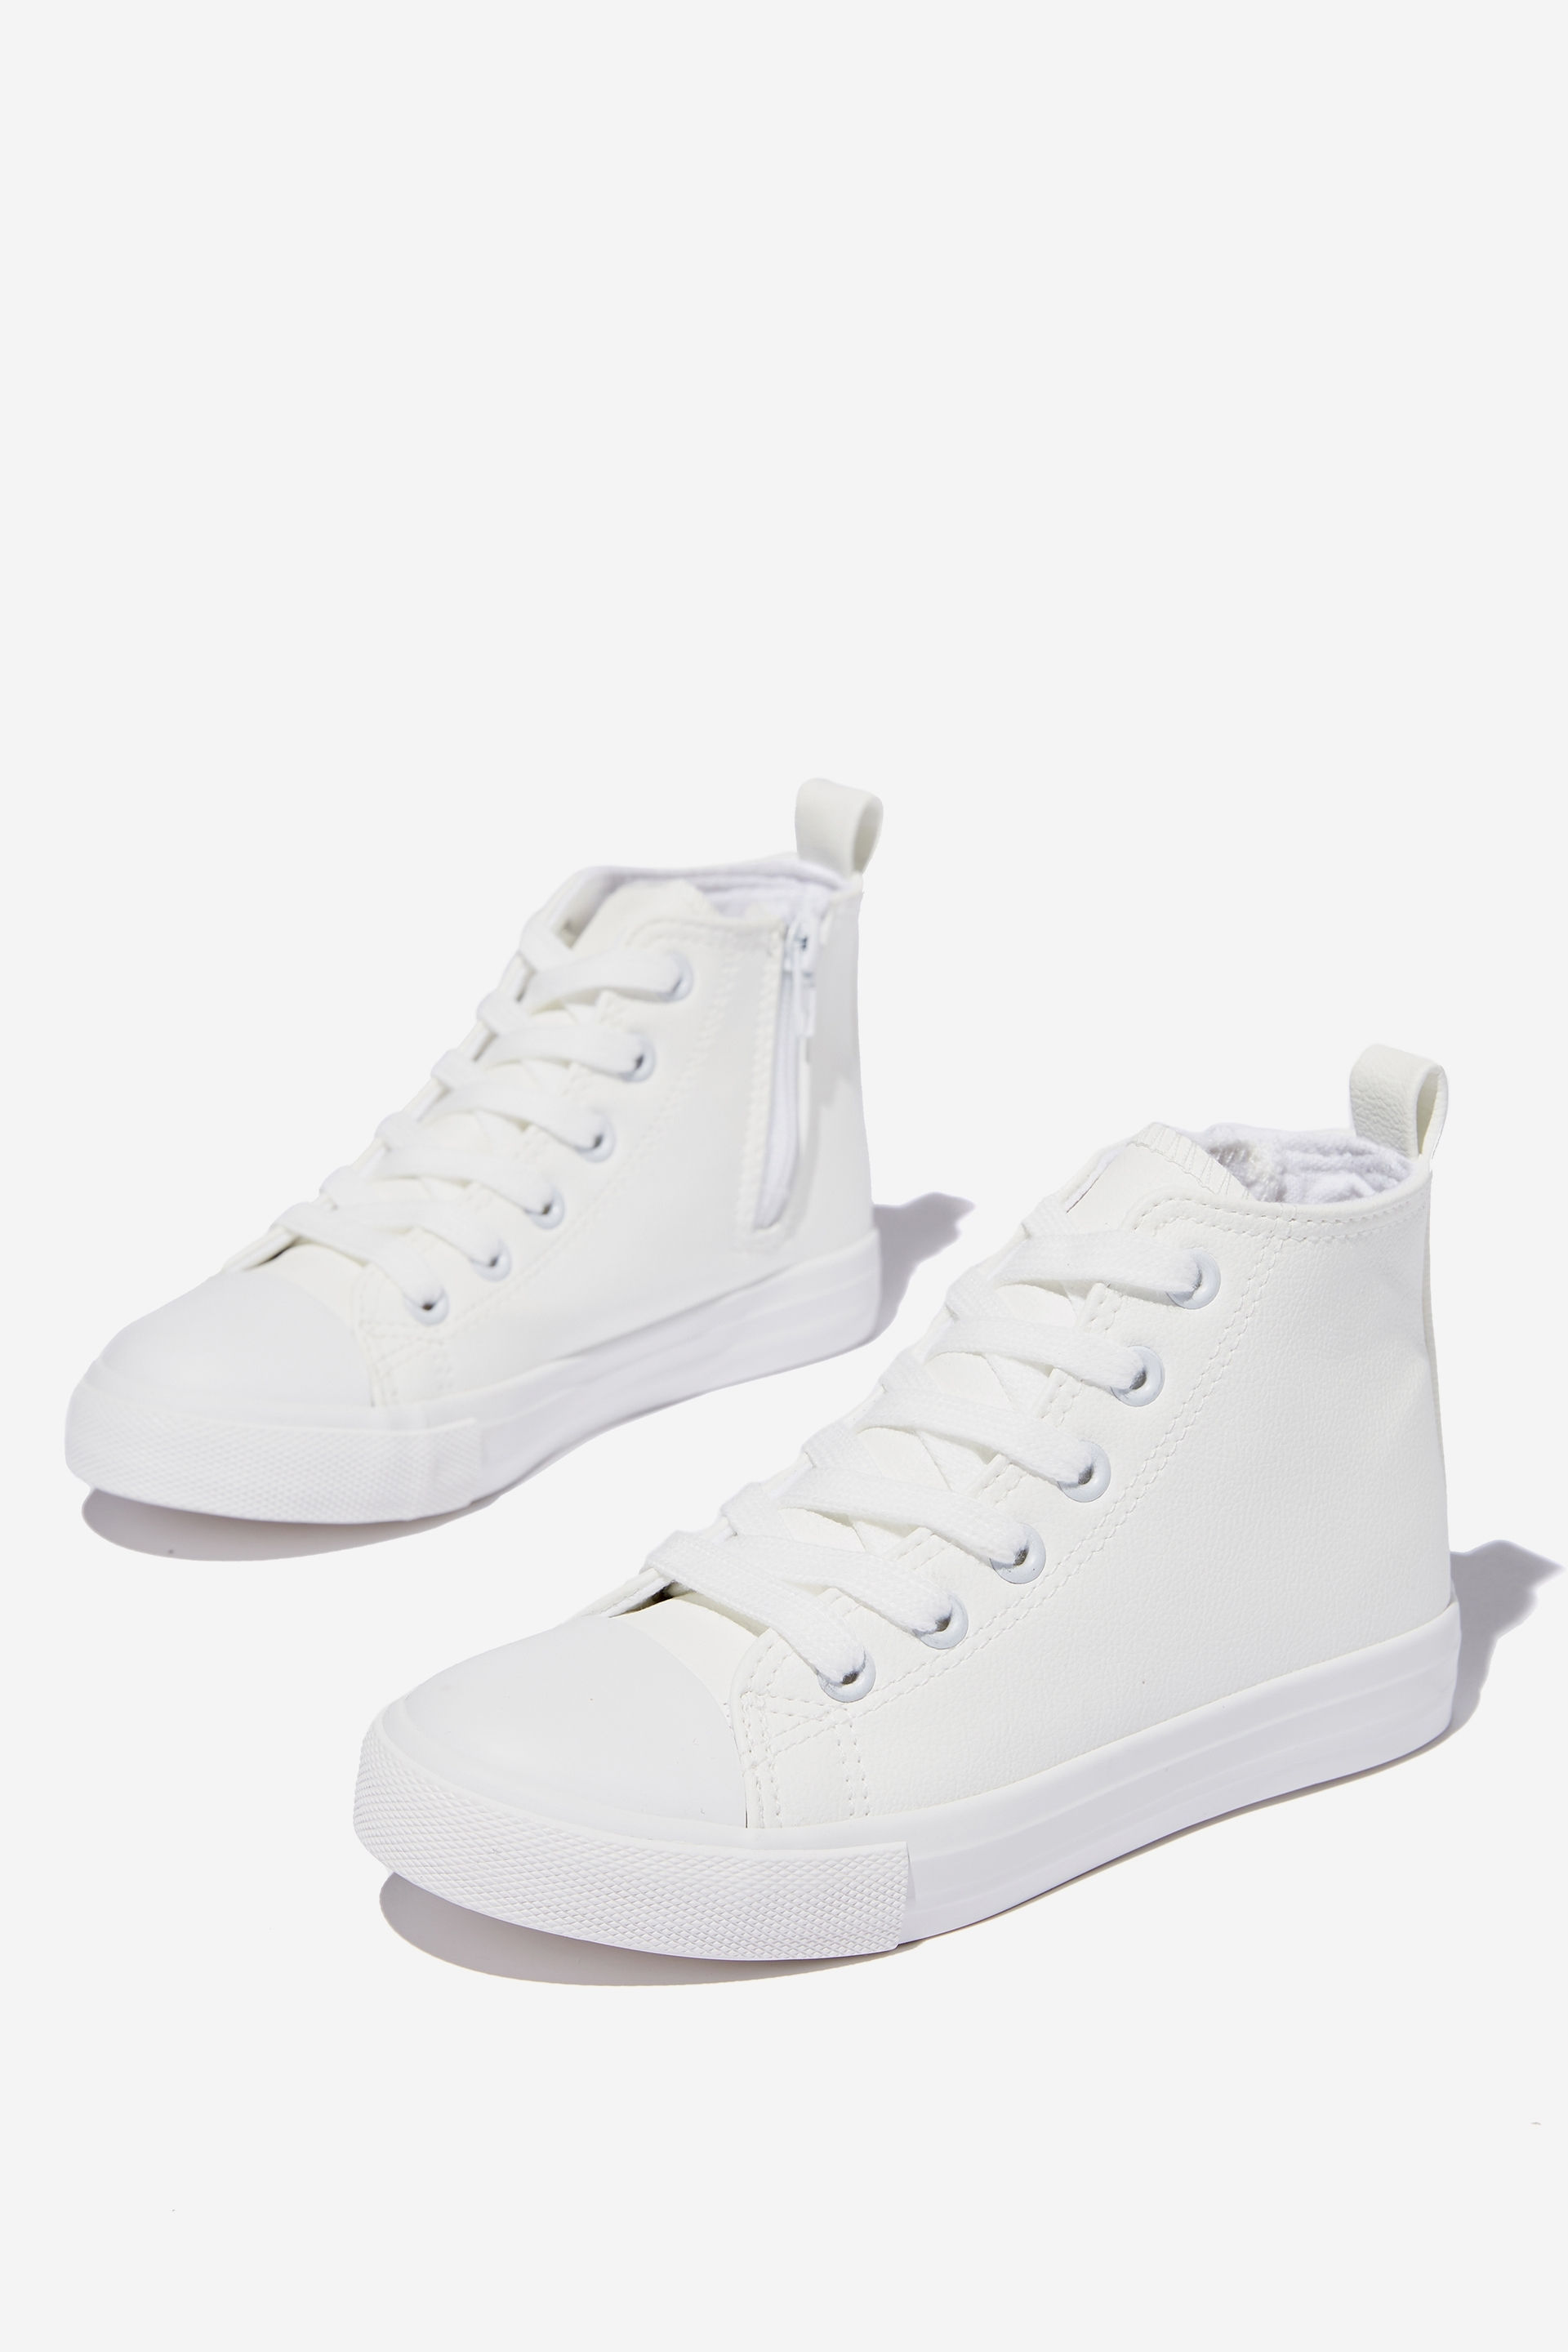 Cotton On Kids - Classic High Top Trainer - White